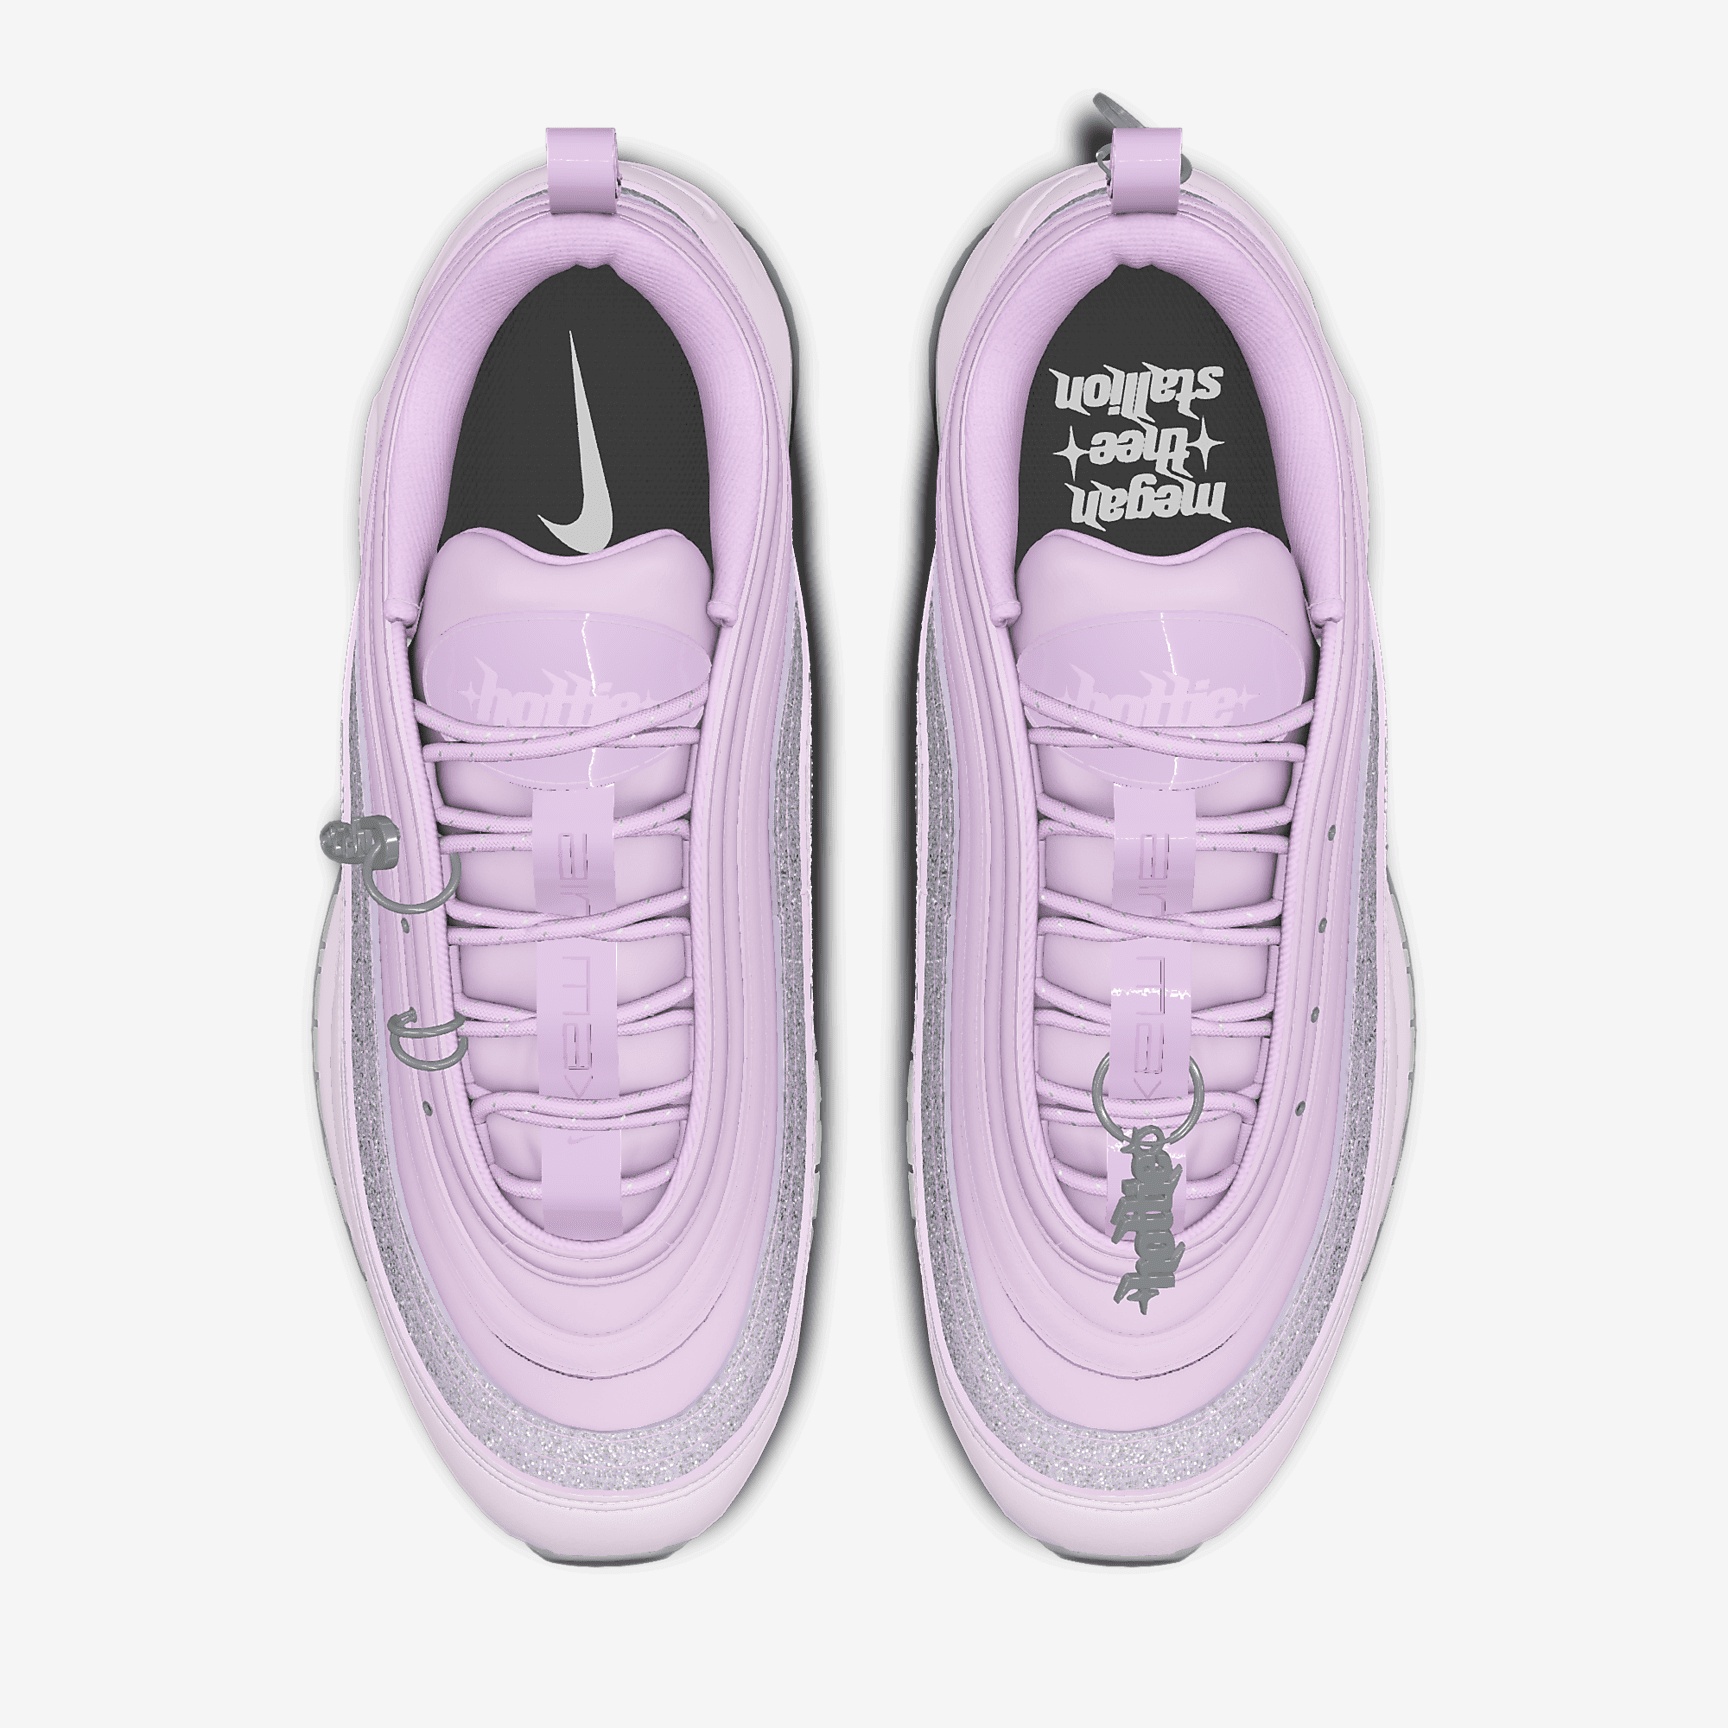 Nike Air Max 97 "Something For Thee Hotties" By You Custom Shoes - 4